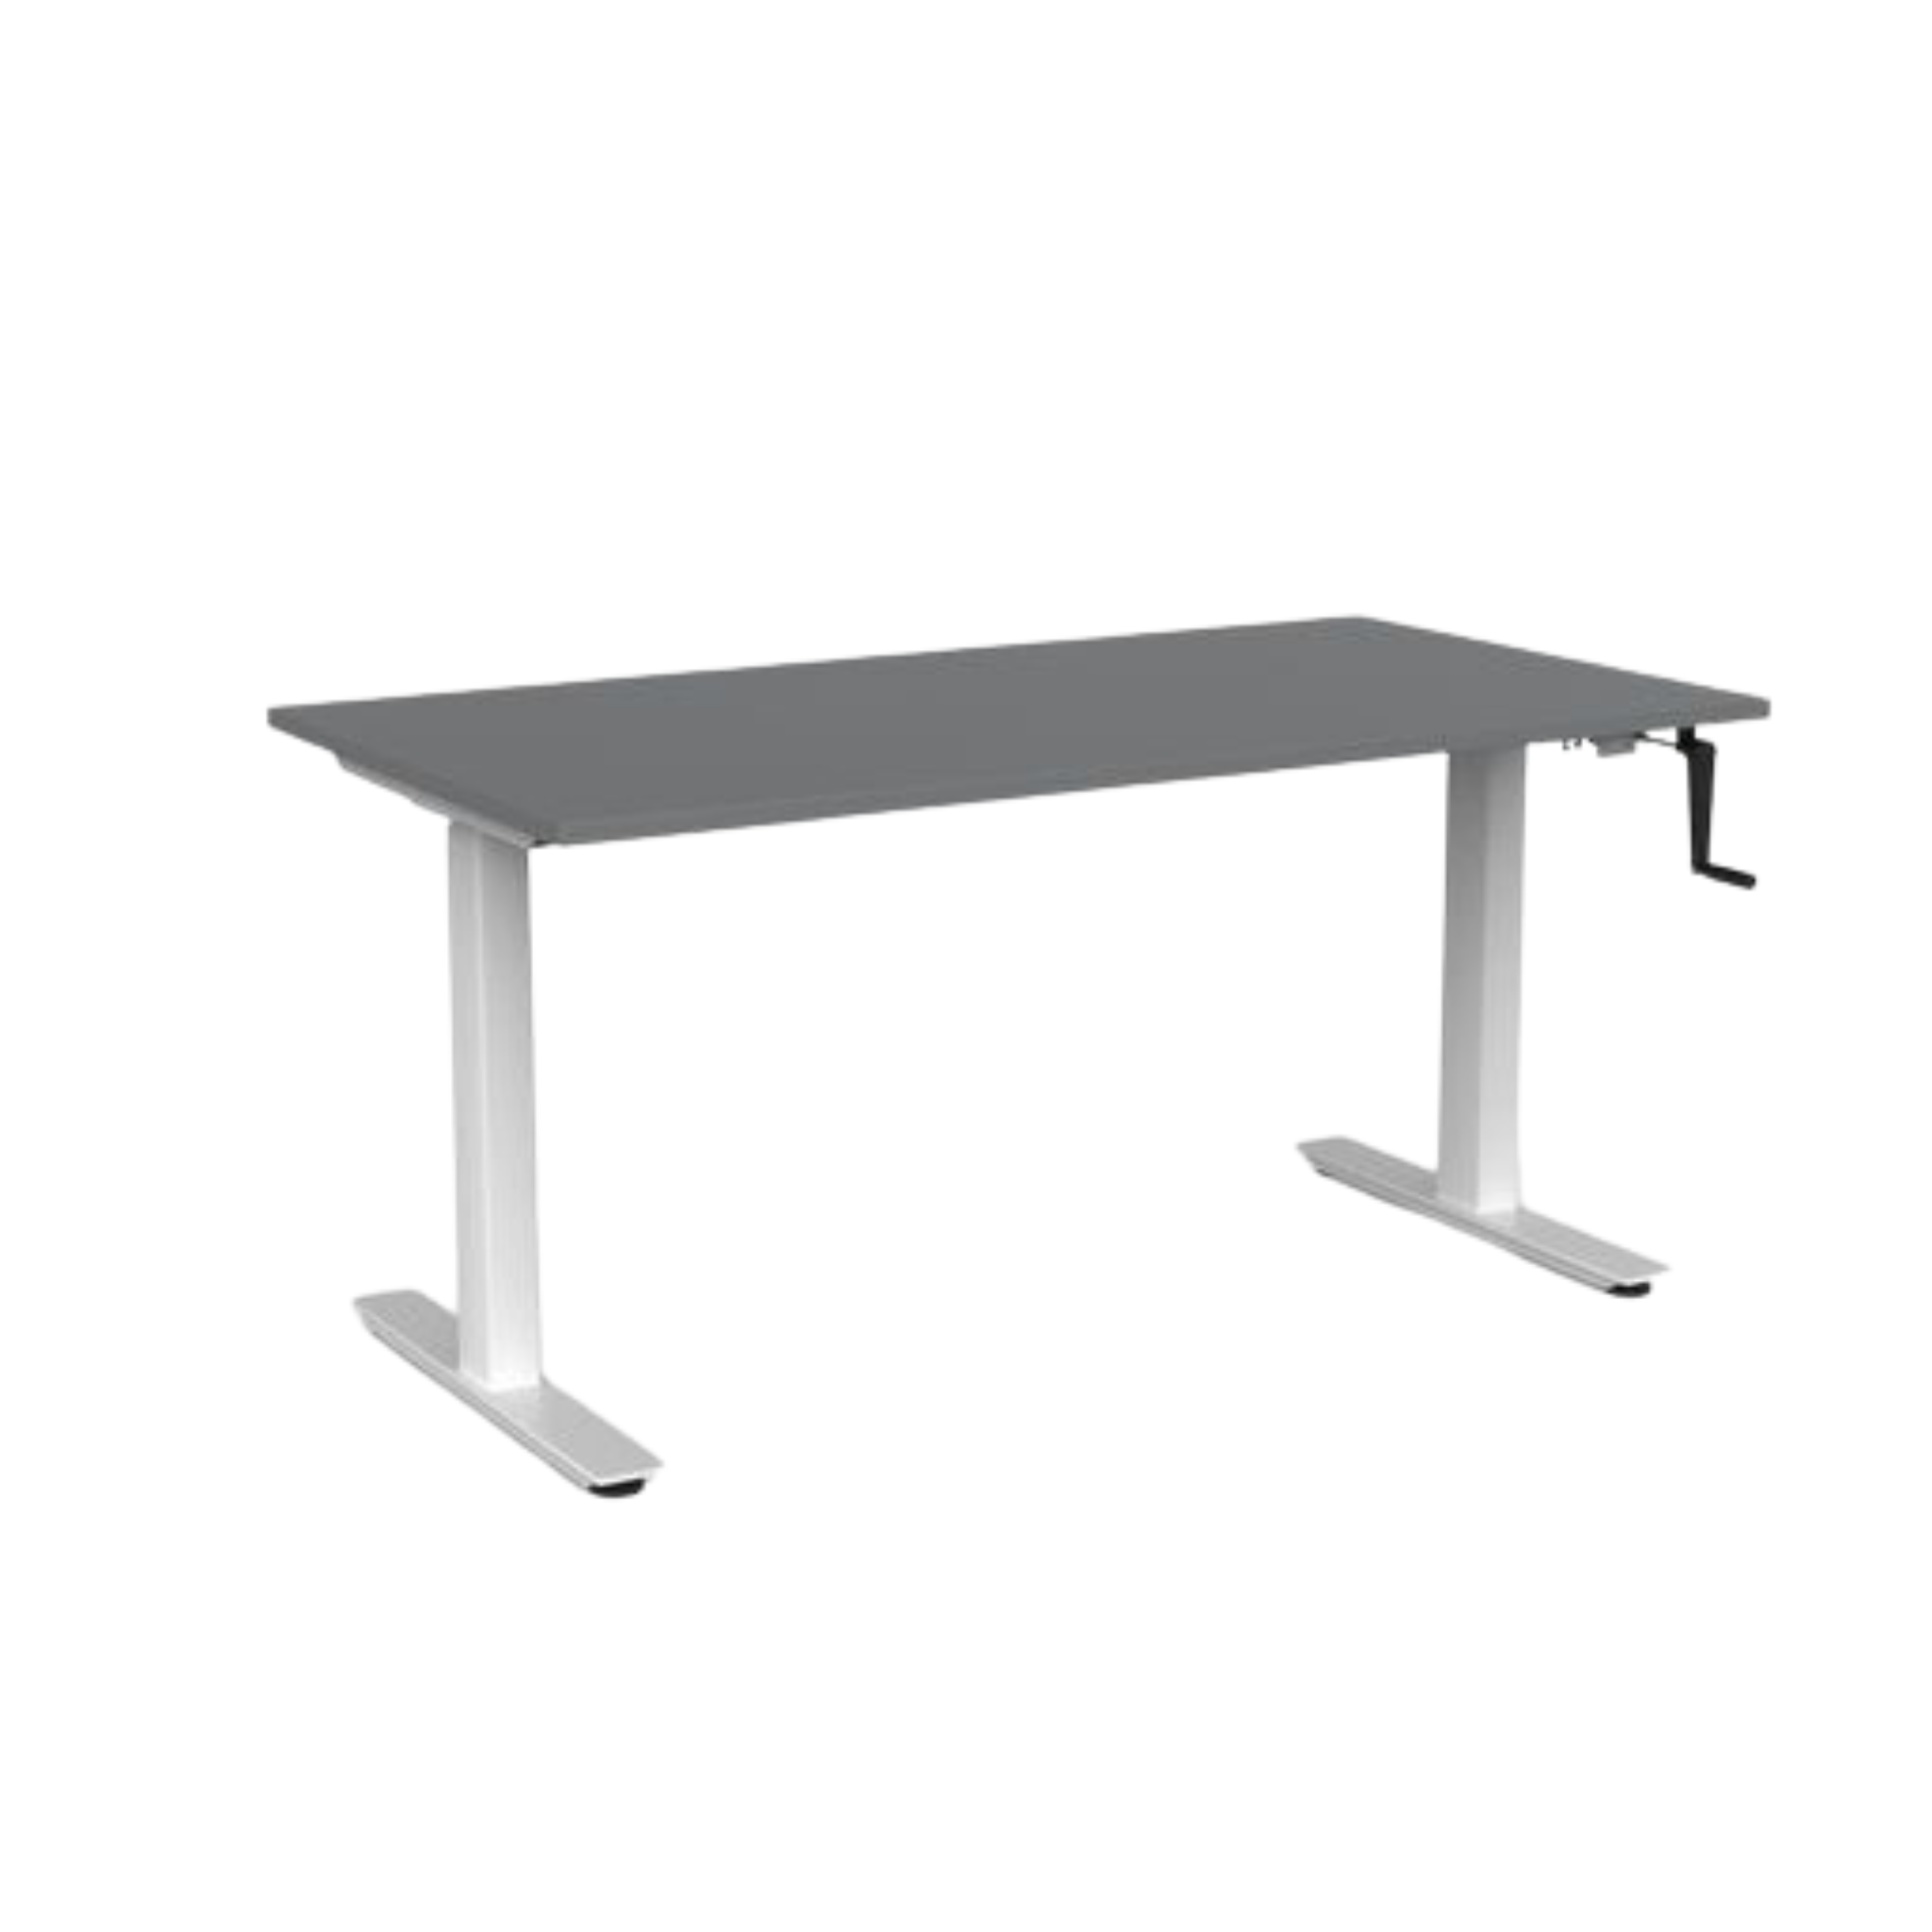 Agile winder sit to stand desk with white frame and silver top